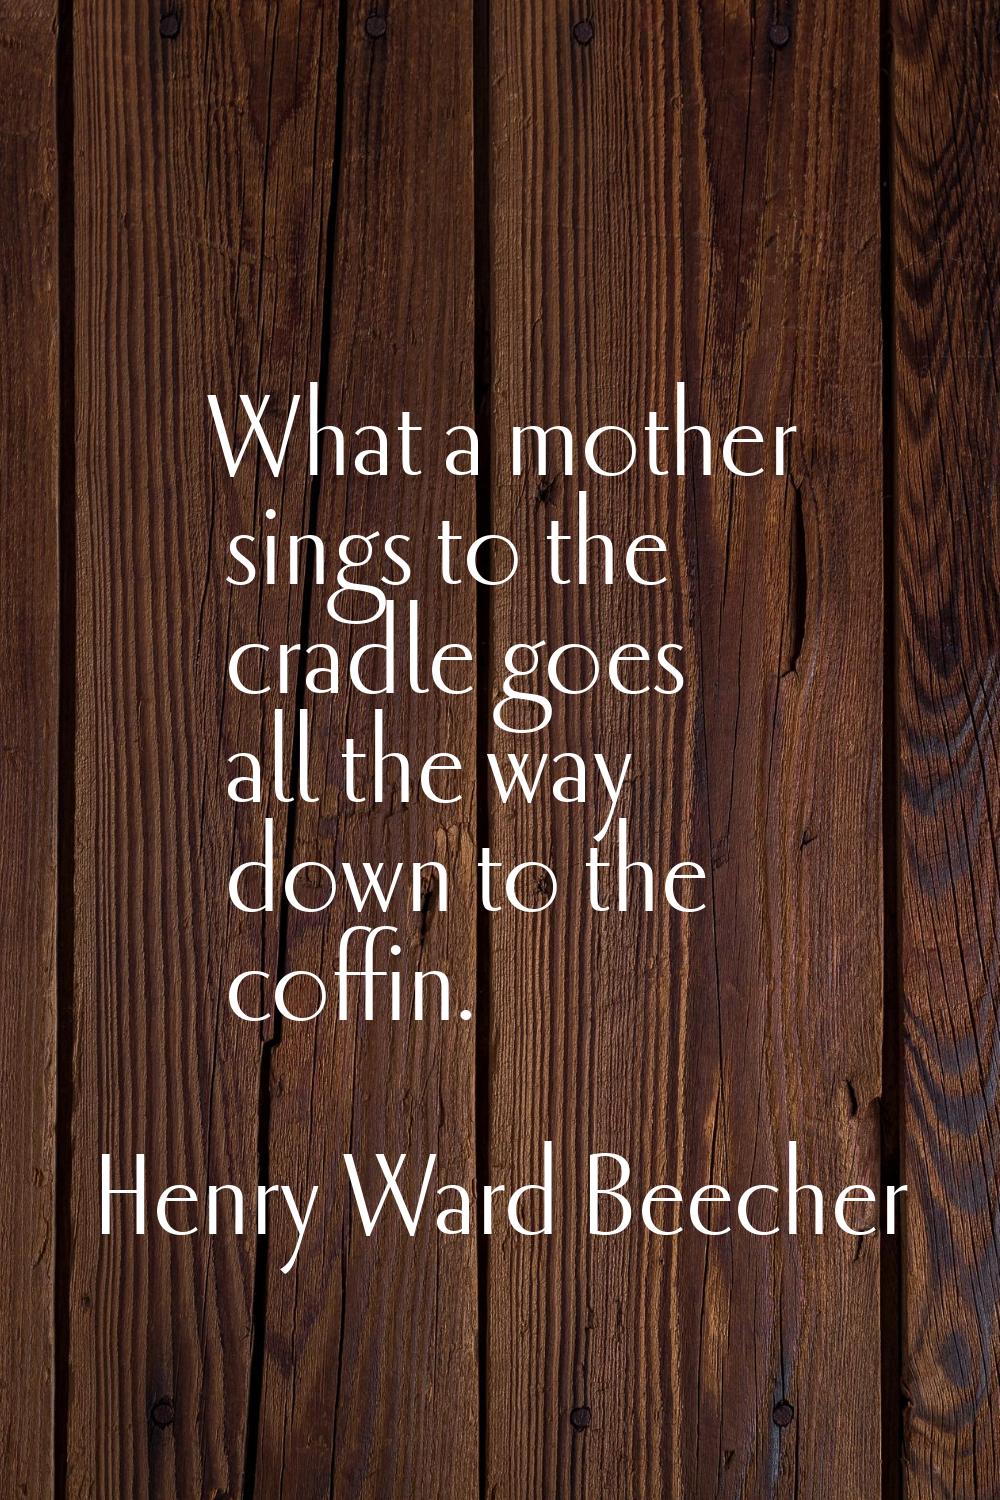 What a mother sings to the cradle goes all the way down to the coffin.